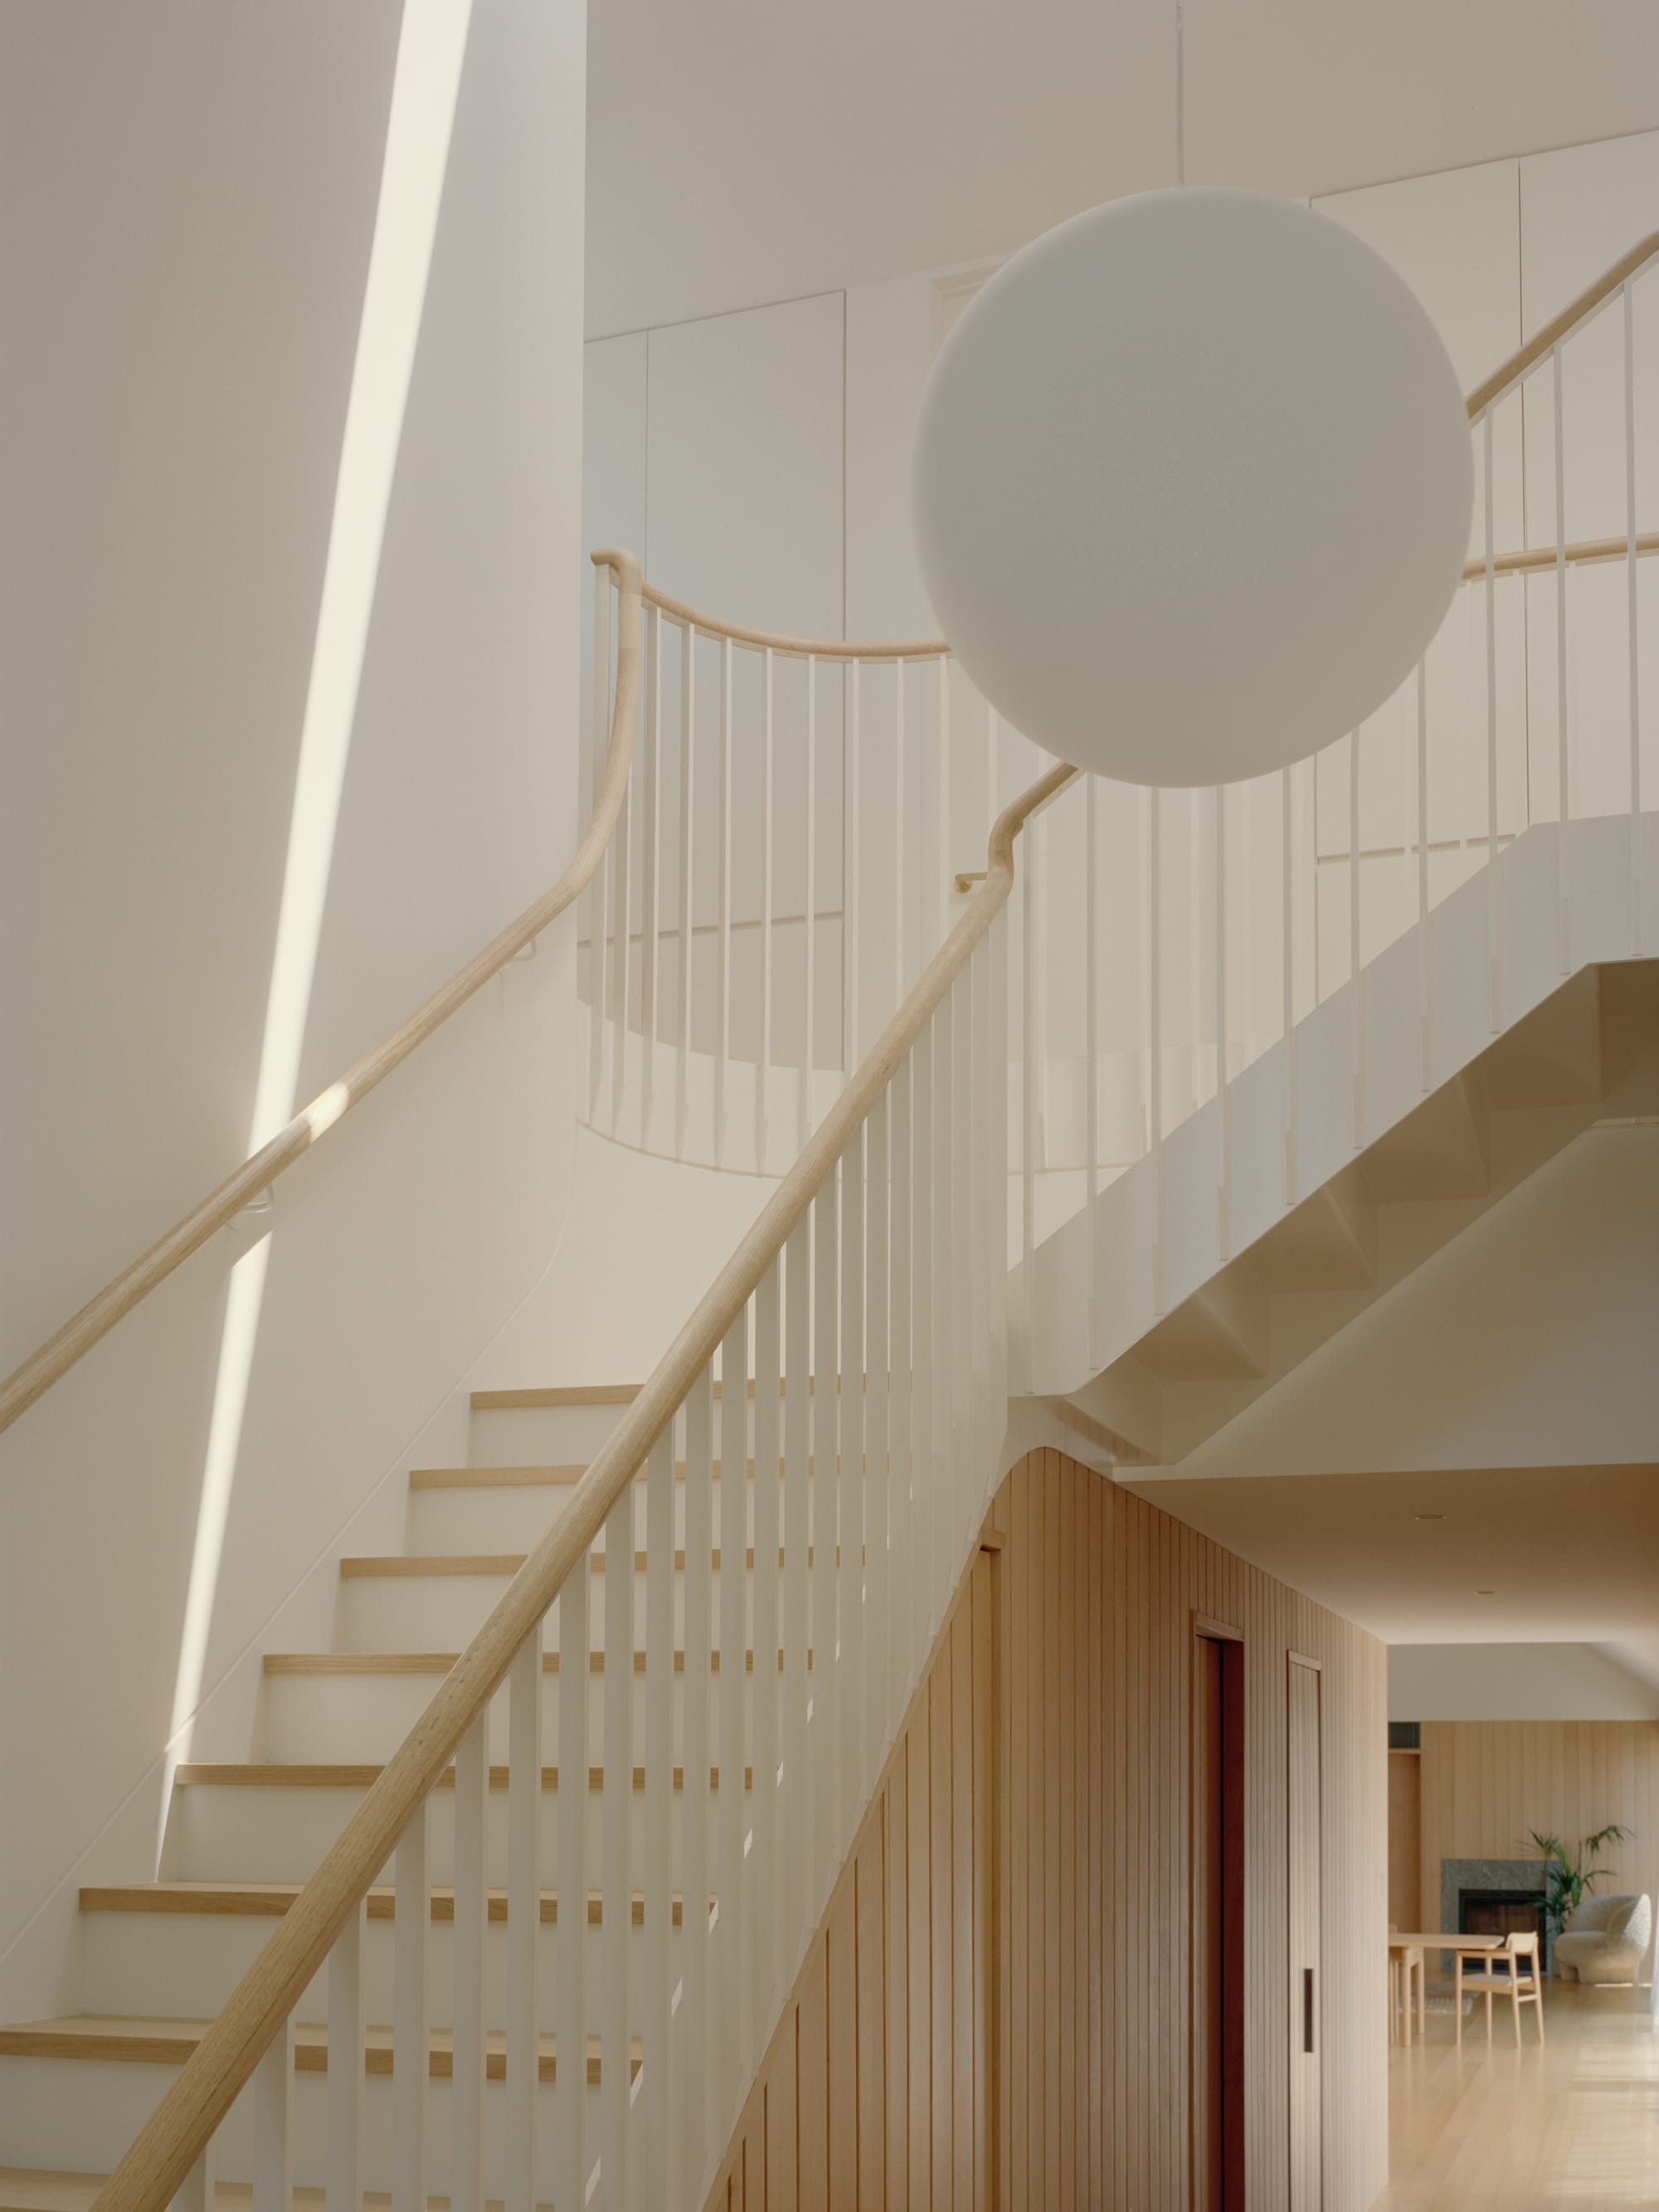 Gable Park by Weaver+Co Architects. Photography by Tasha Tylee. Timber and white staircase in residential home with large void. Spherical pendant hangs in void. Side of stairs clad in light timber. 